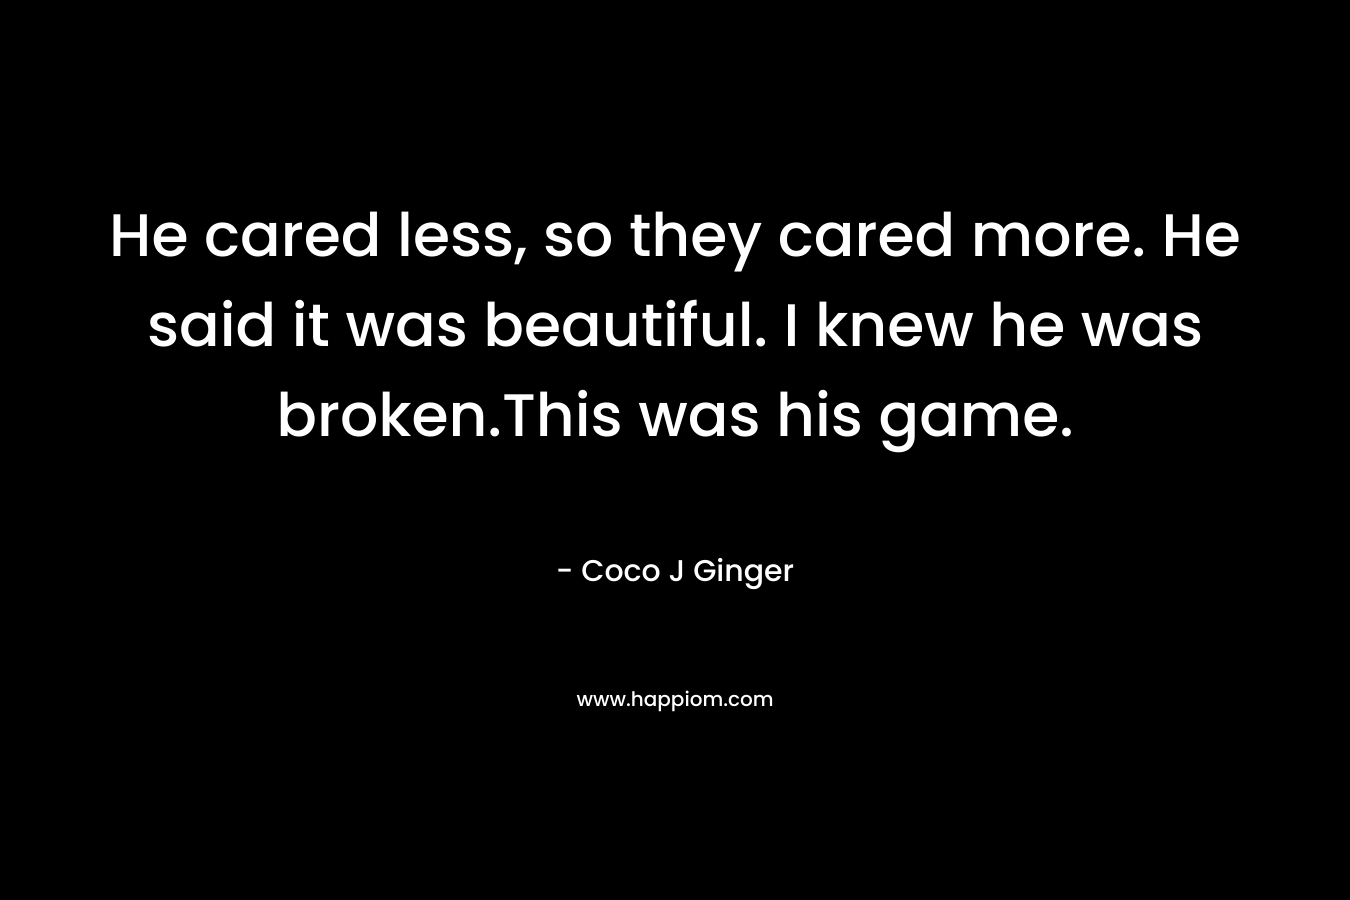 He cared less, so they cared more. He said it was beautiful. I knew he was broken.This was his game.